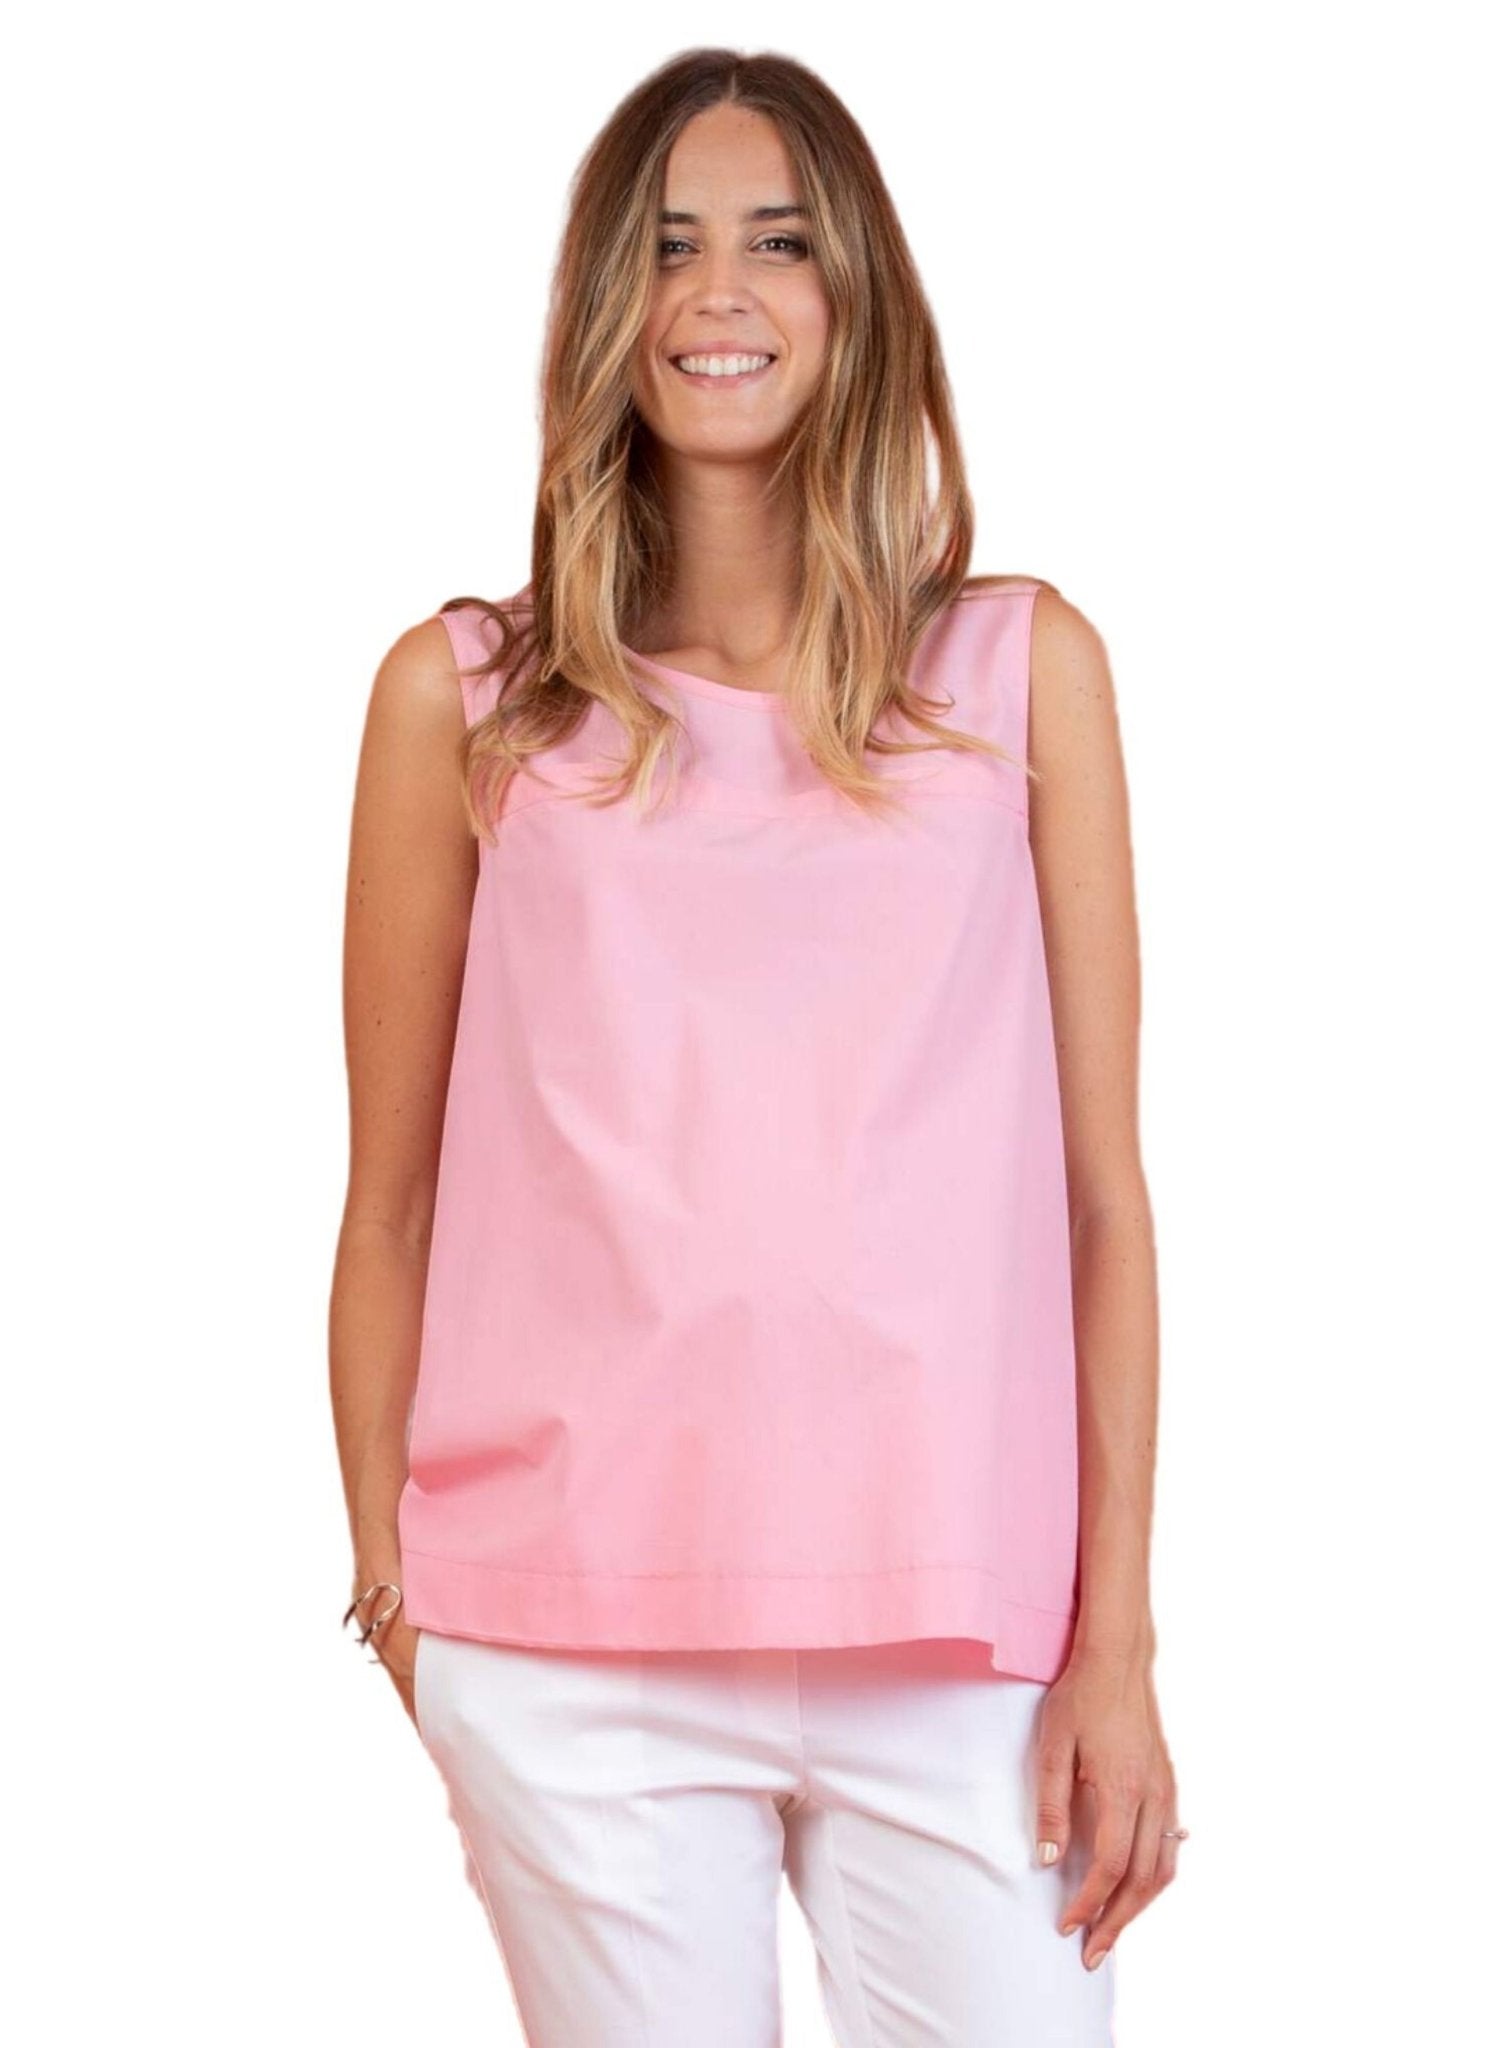 Maternity Top with Creases on the Back - Pink - Mums and Bumps